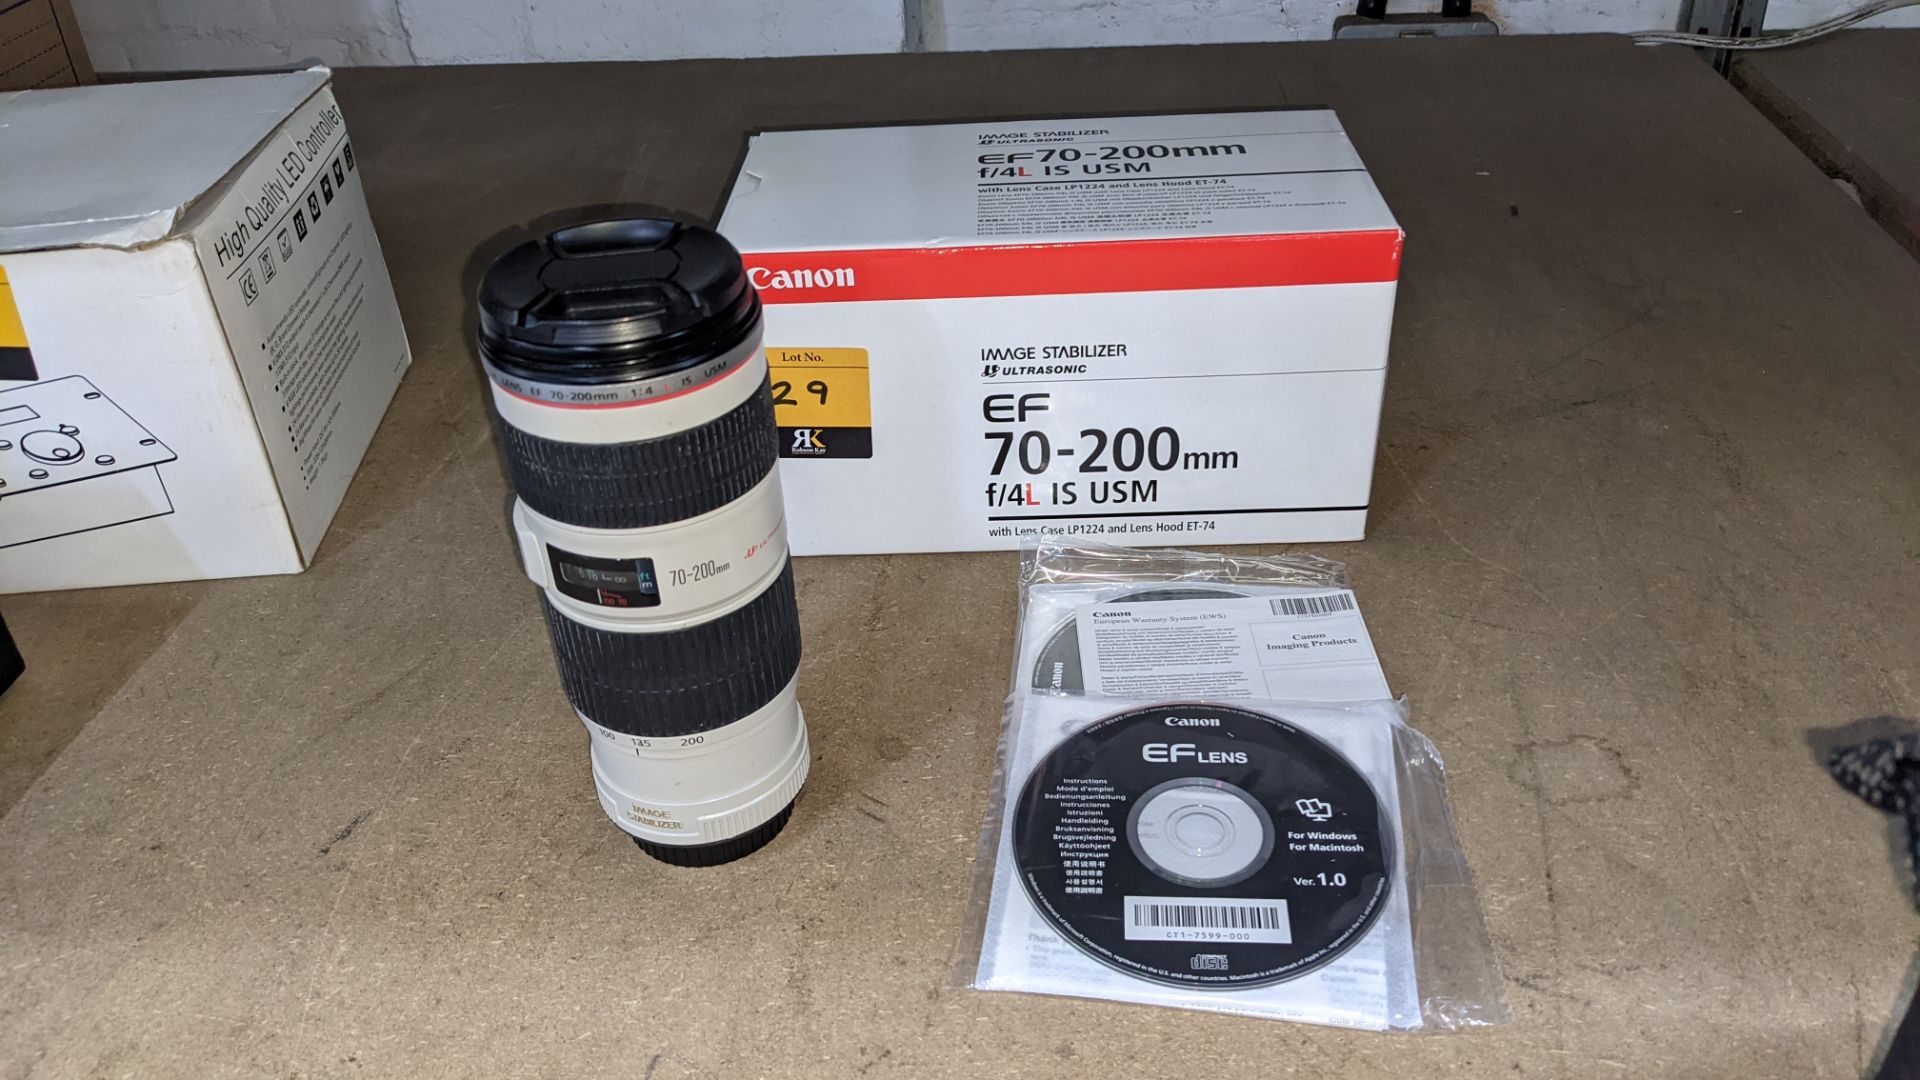 Canon EF 70-200mm lens, image stabilizer ultrasonic, F/4L IS USM. Includes box & discs as pictured